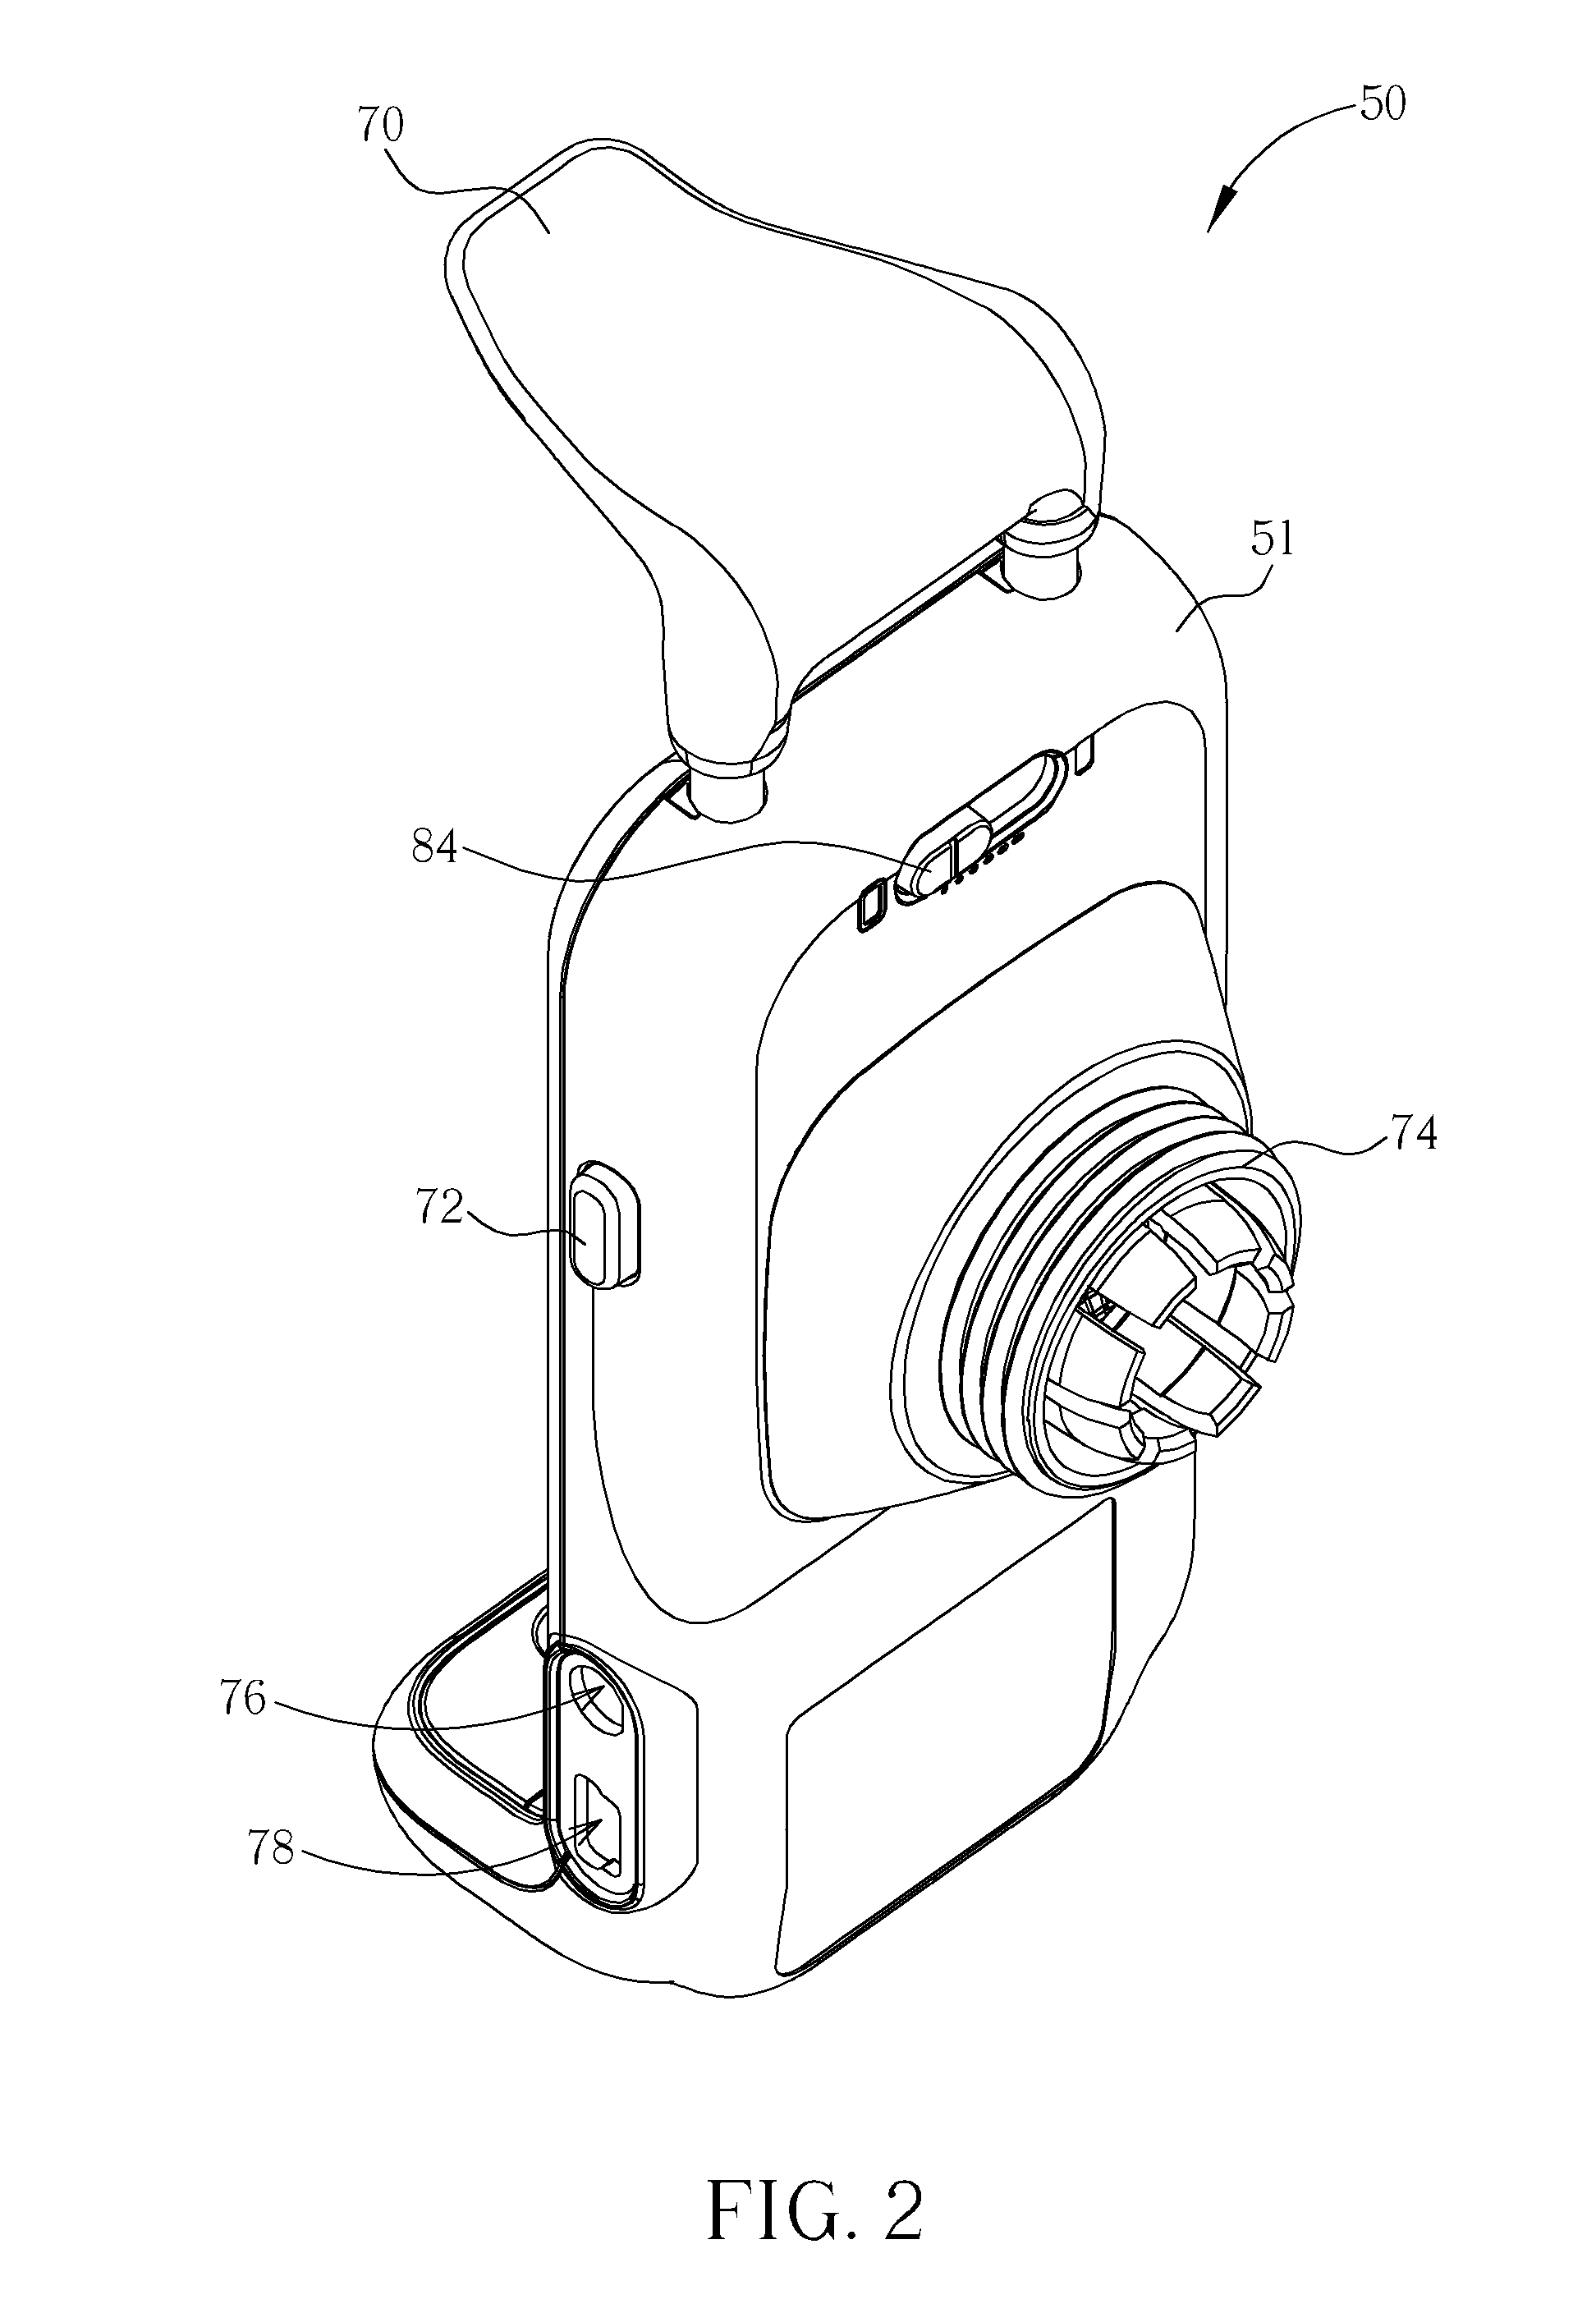 Mobile phone cradle with three-point retention of portable electronic device installed in the cradle